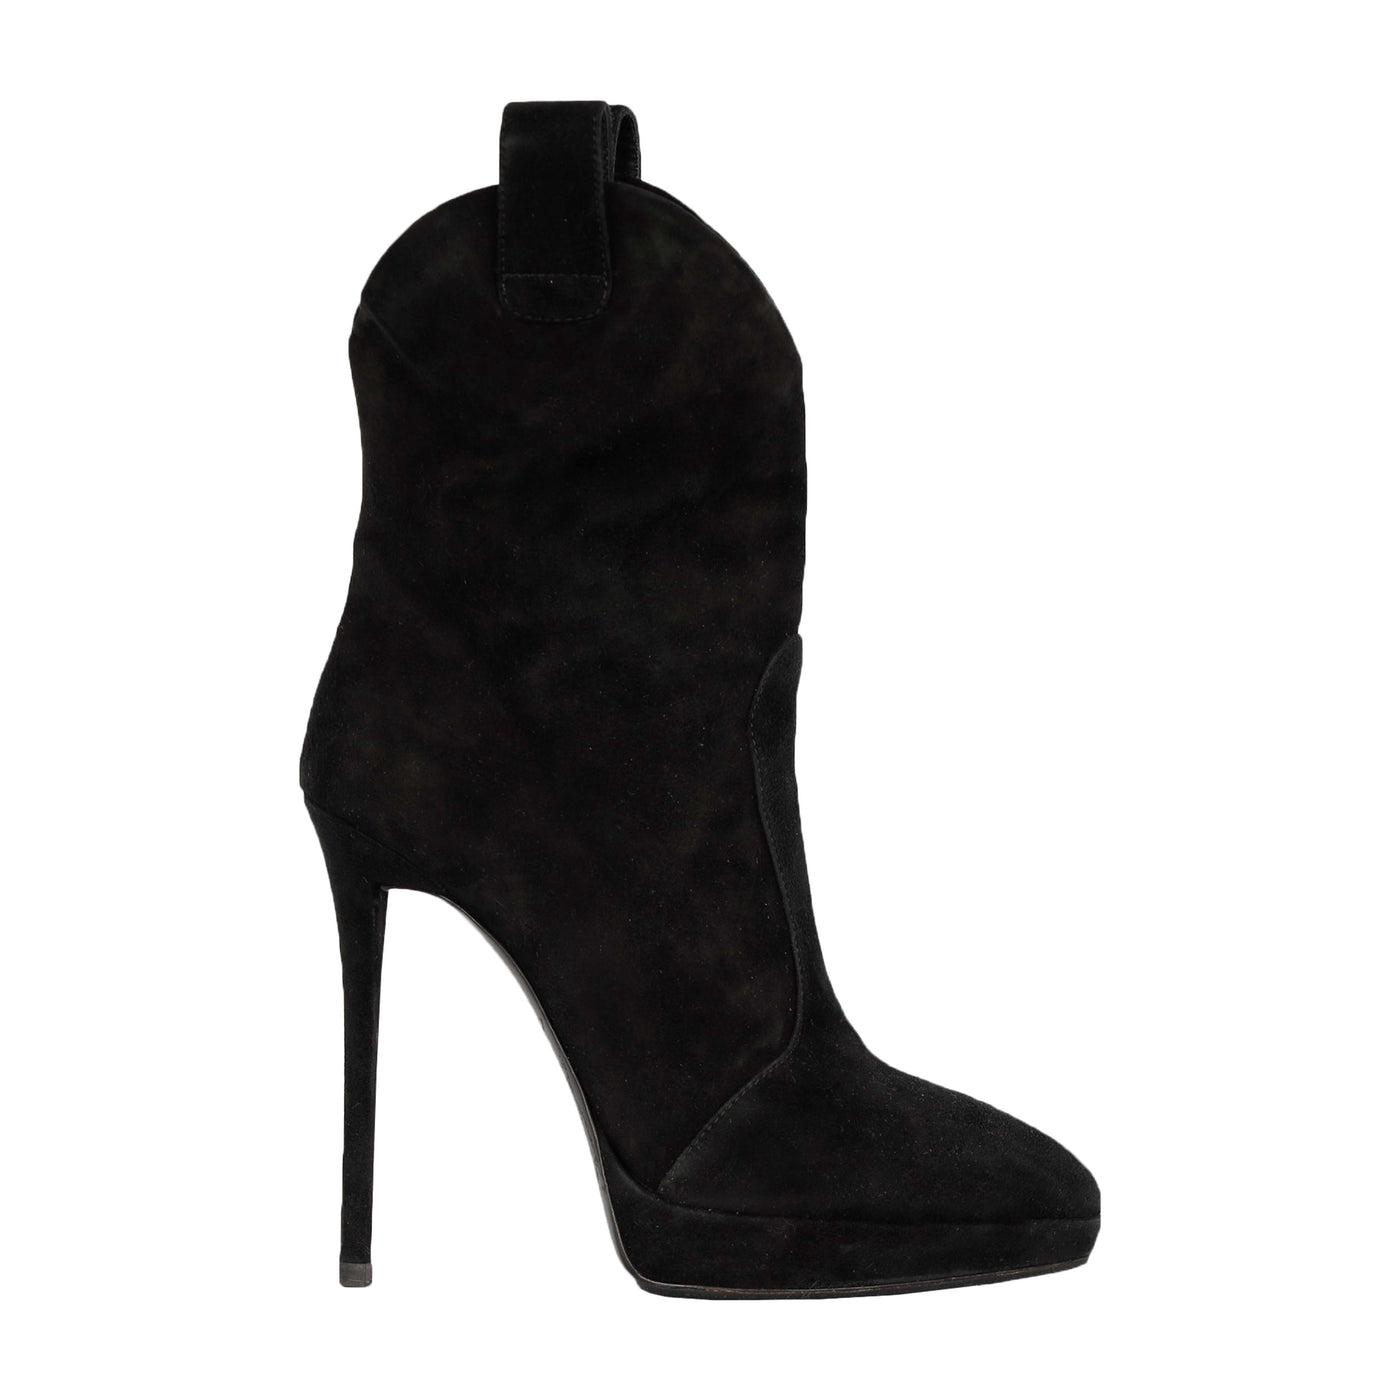 Second hand Giuseppe Zanotti Pointy Suede Black Boots